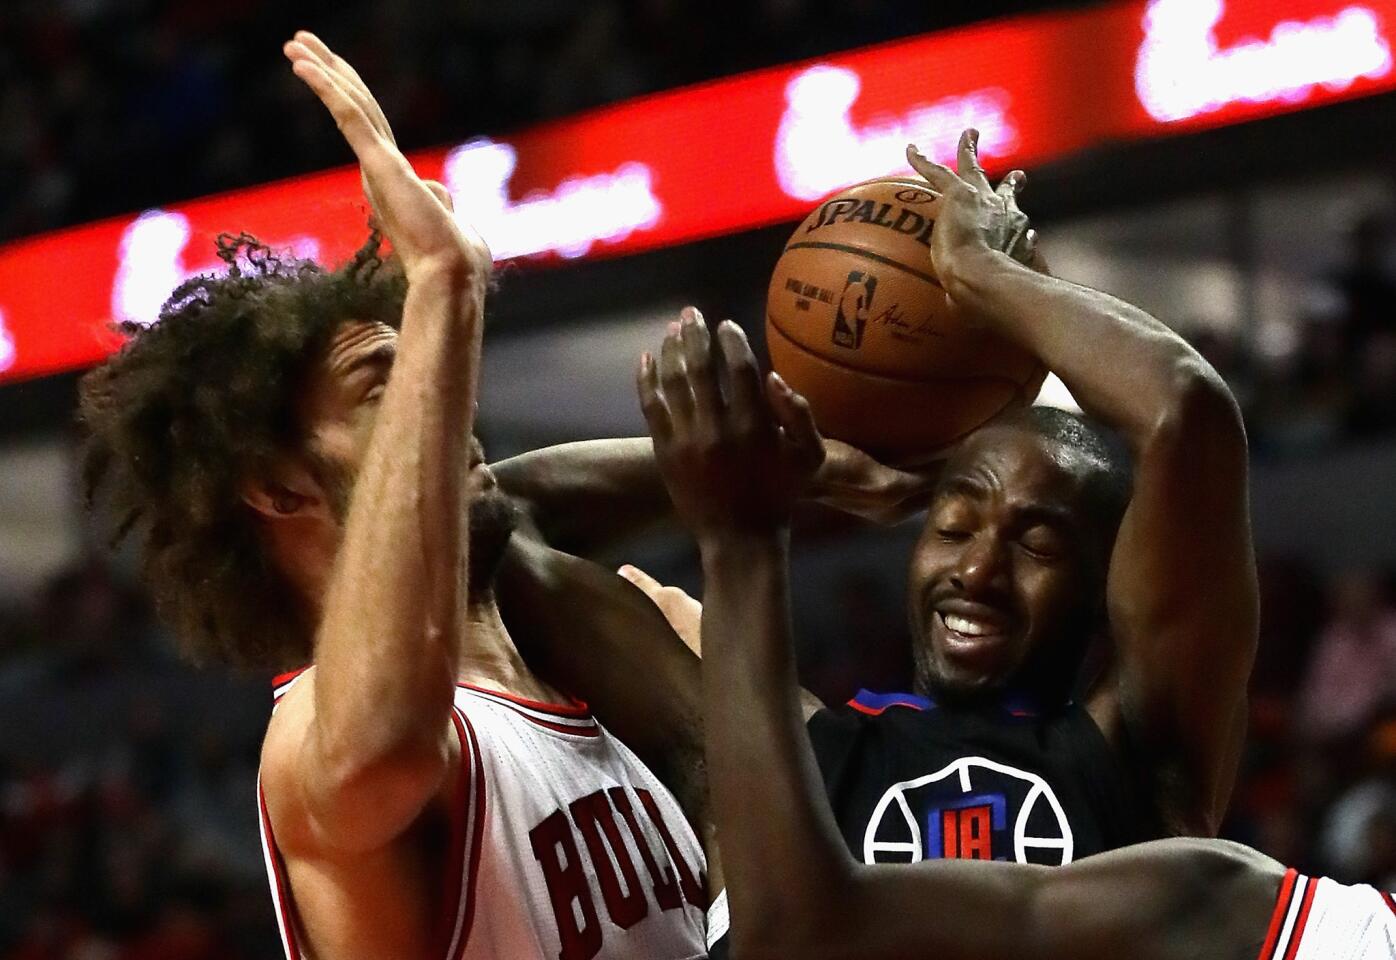 Clippers forward Luc Mbah a Moute is fouled by Bulls center Robin Lopez during the first half.